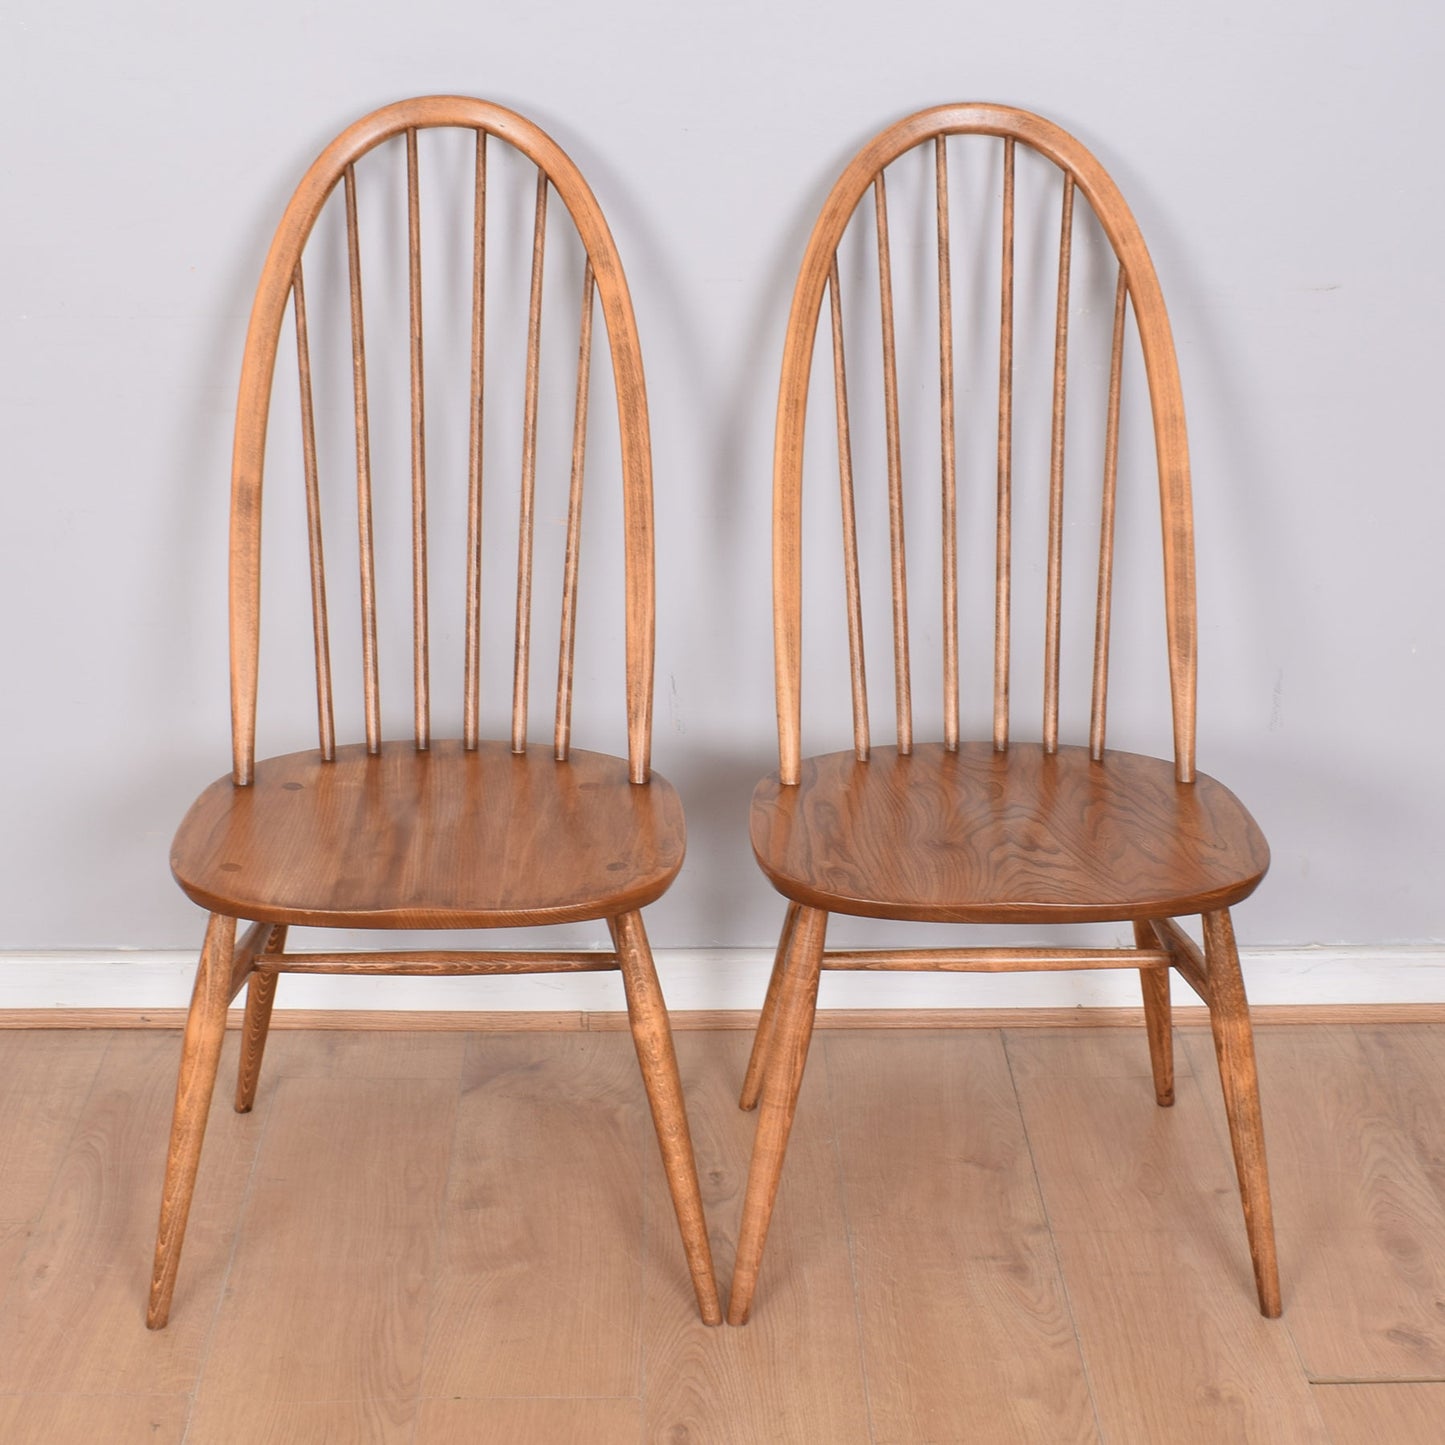 Restored Ercol Dining Table with Four Chairs